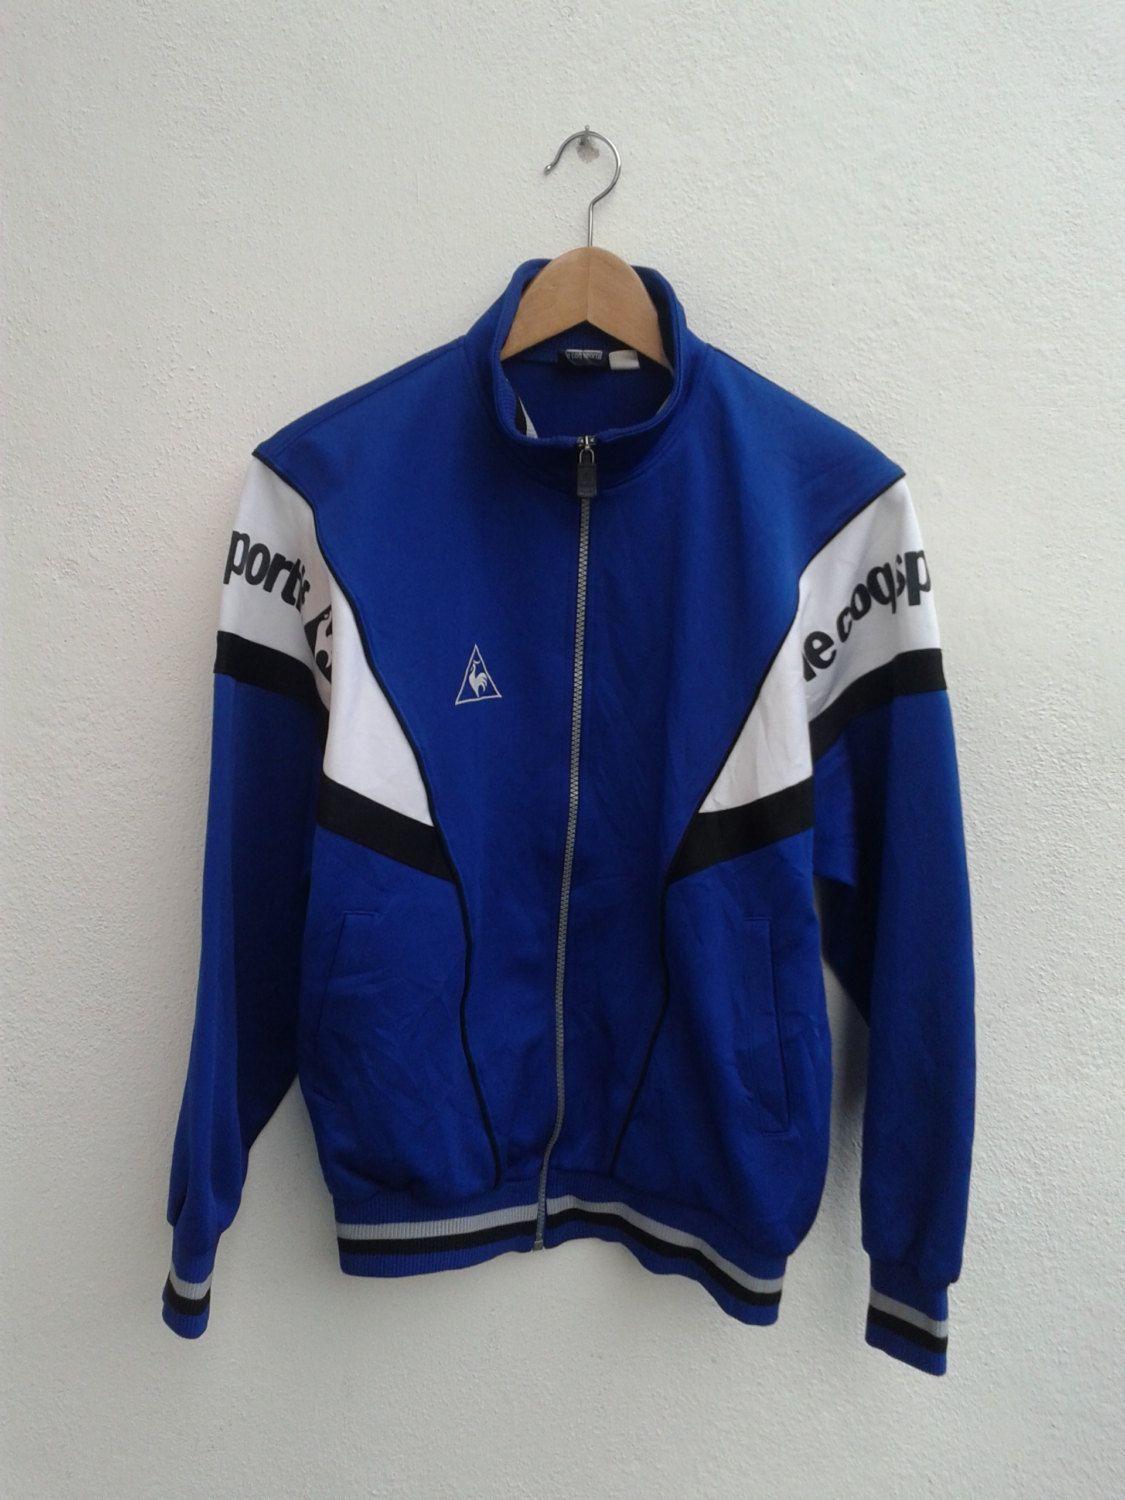 Triangle with Rooster Logo - LE Coq Sportif Track And Feild Sportswear Jacket Vintage 90s Rooster ...